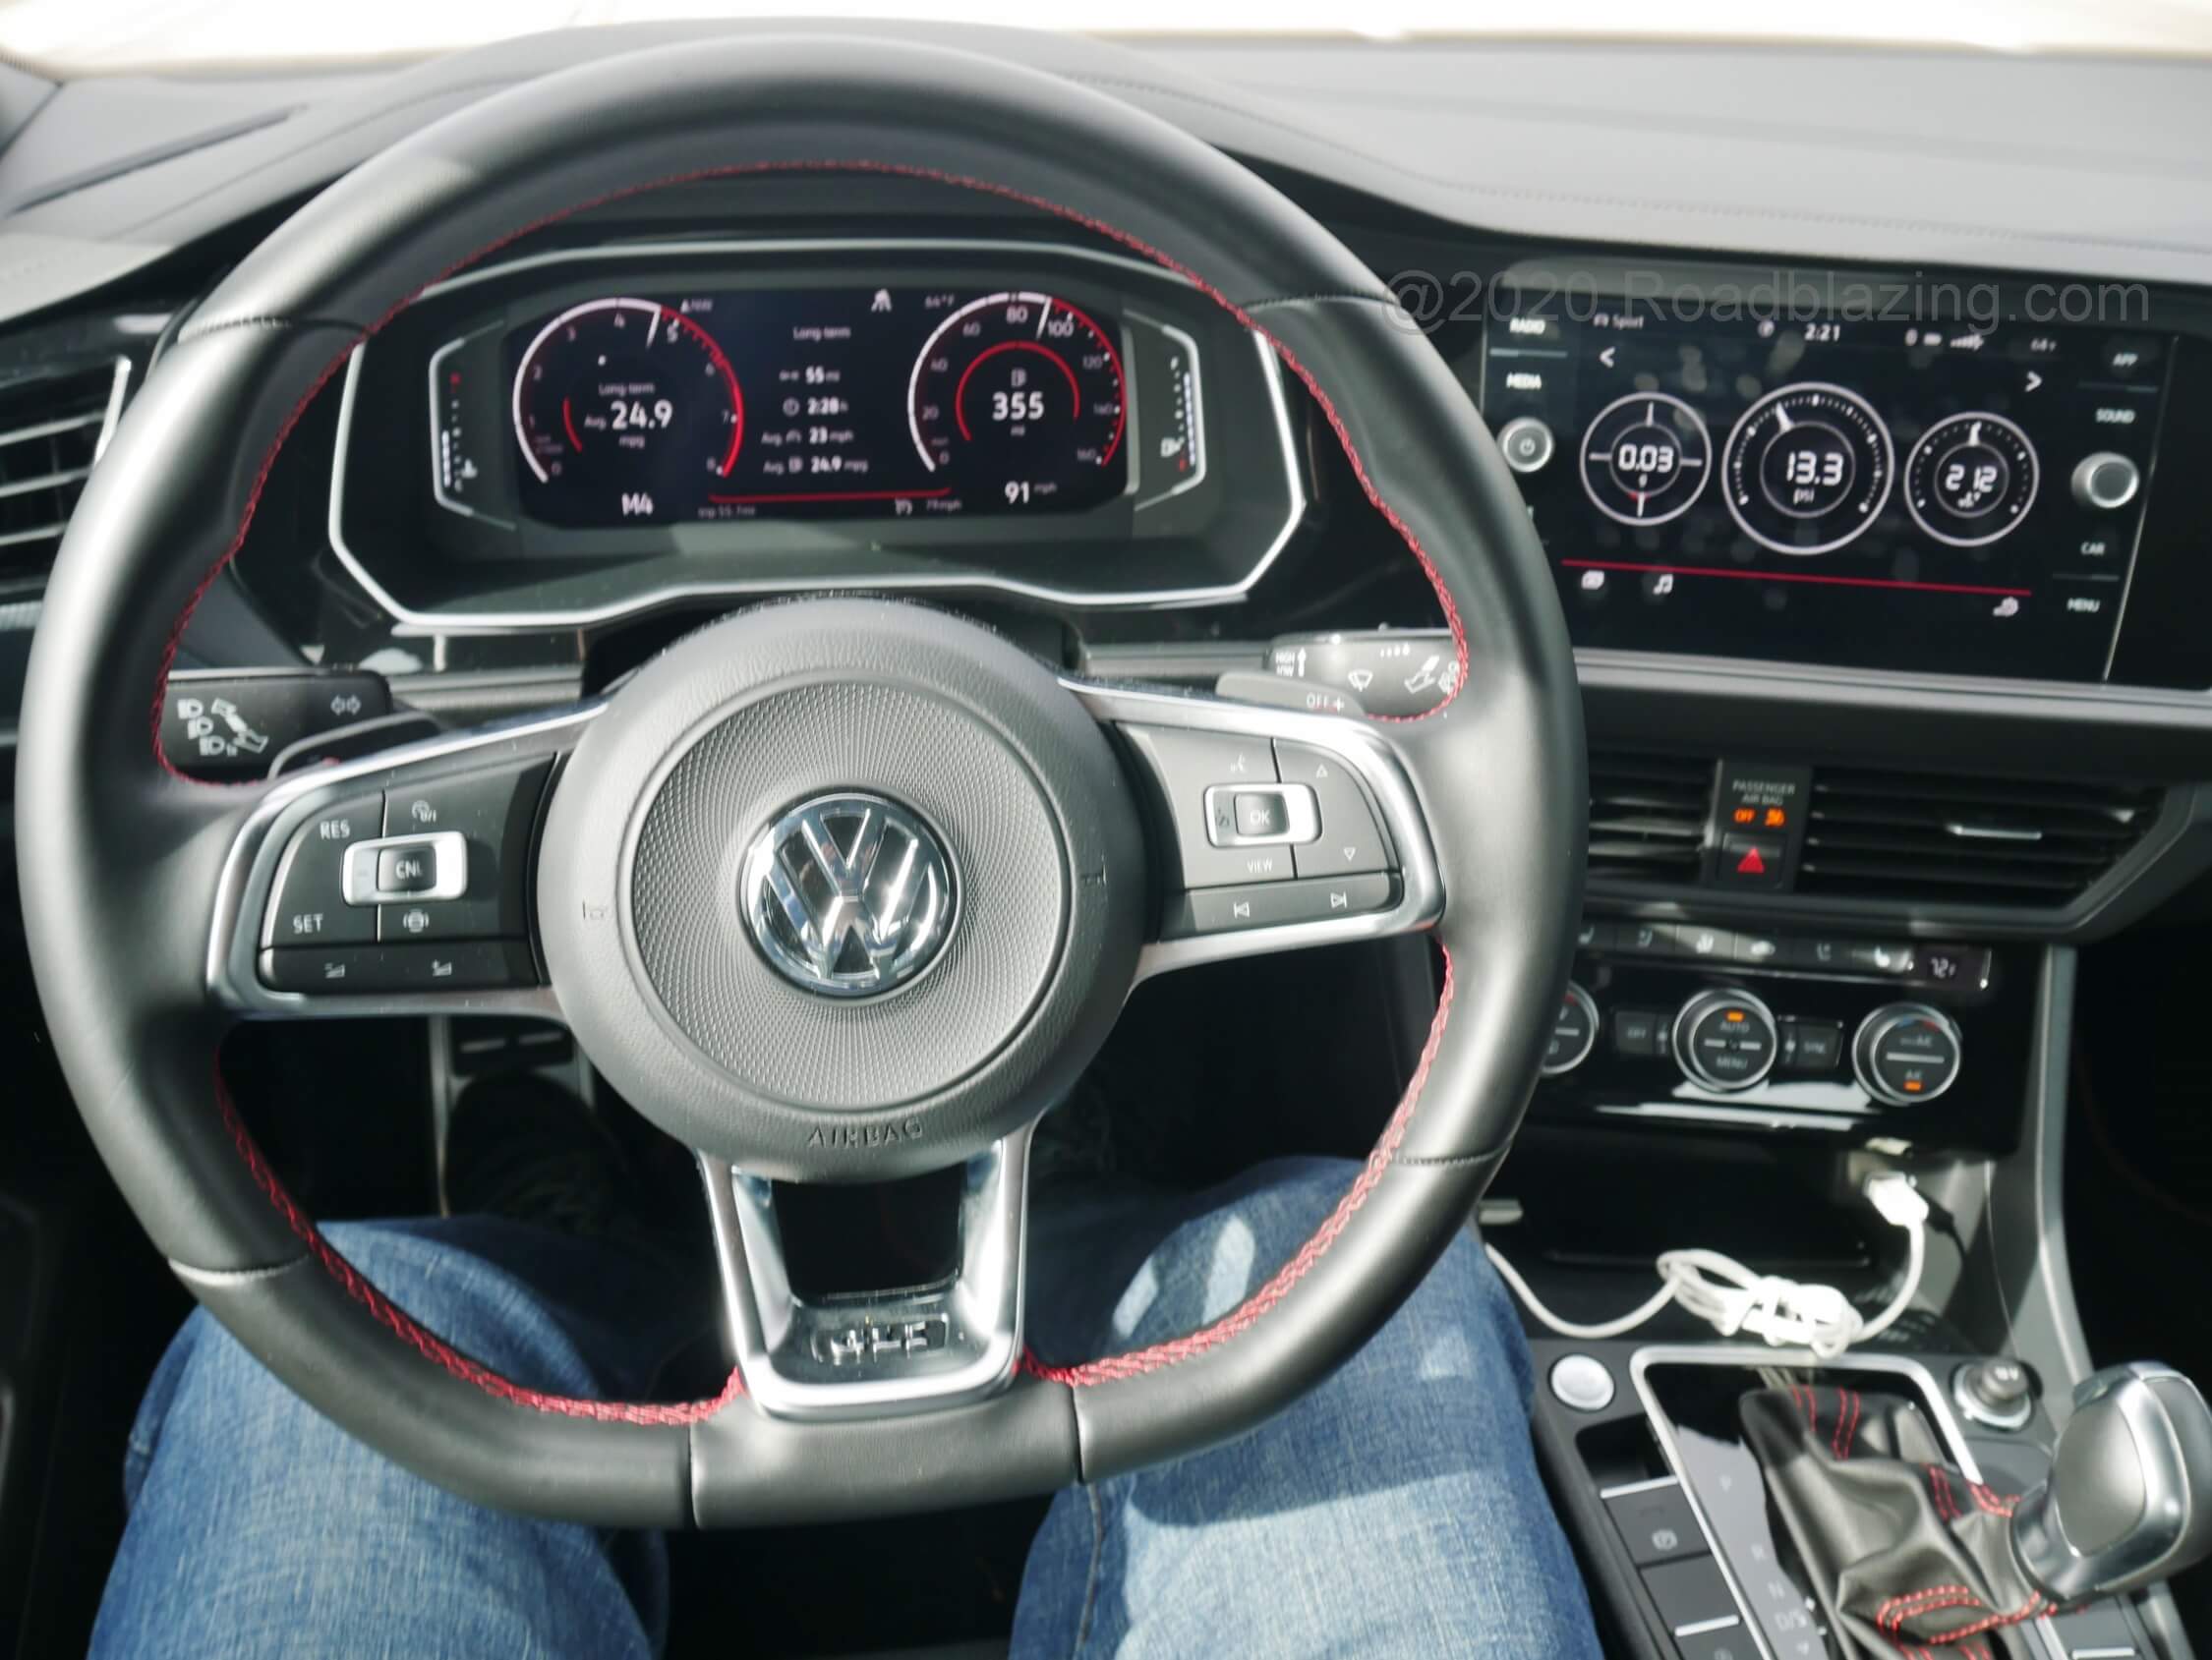 2020 Volkswagen Jetta GLI Autobahn: Digital gauge cluster and sports display on the 8.0" touch LCD infotainment screen